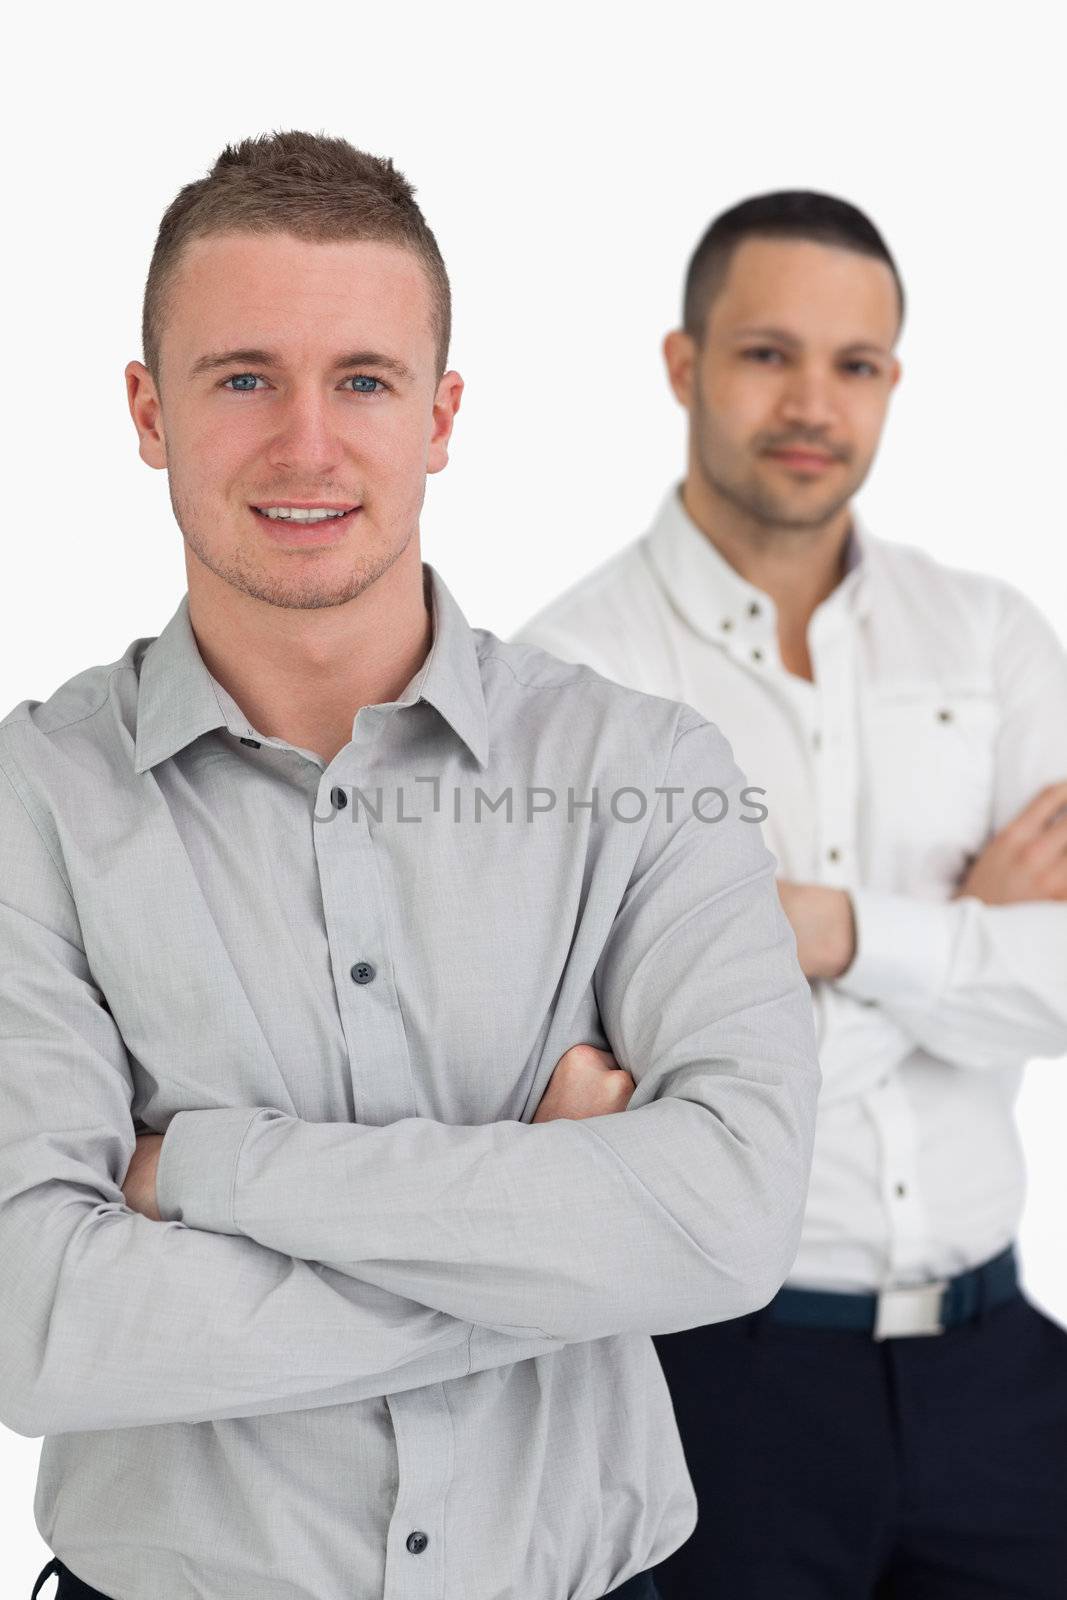 Two men smiling while crossing their arms against a white background